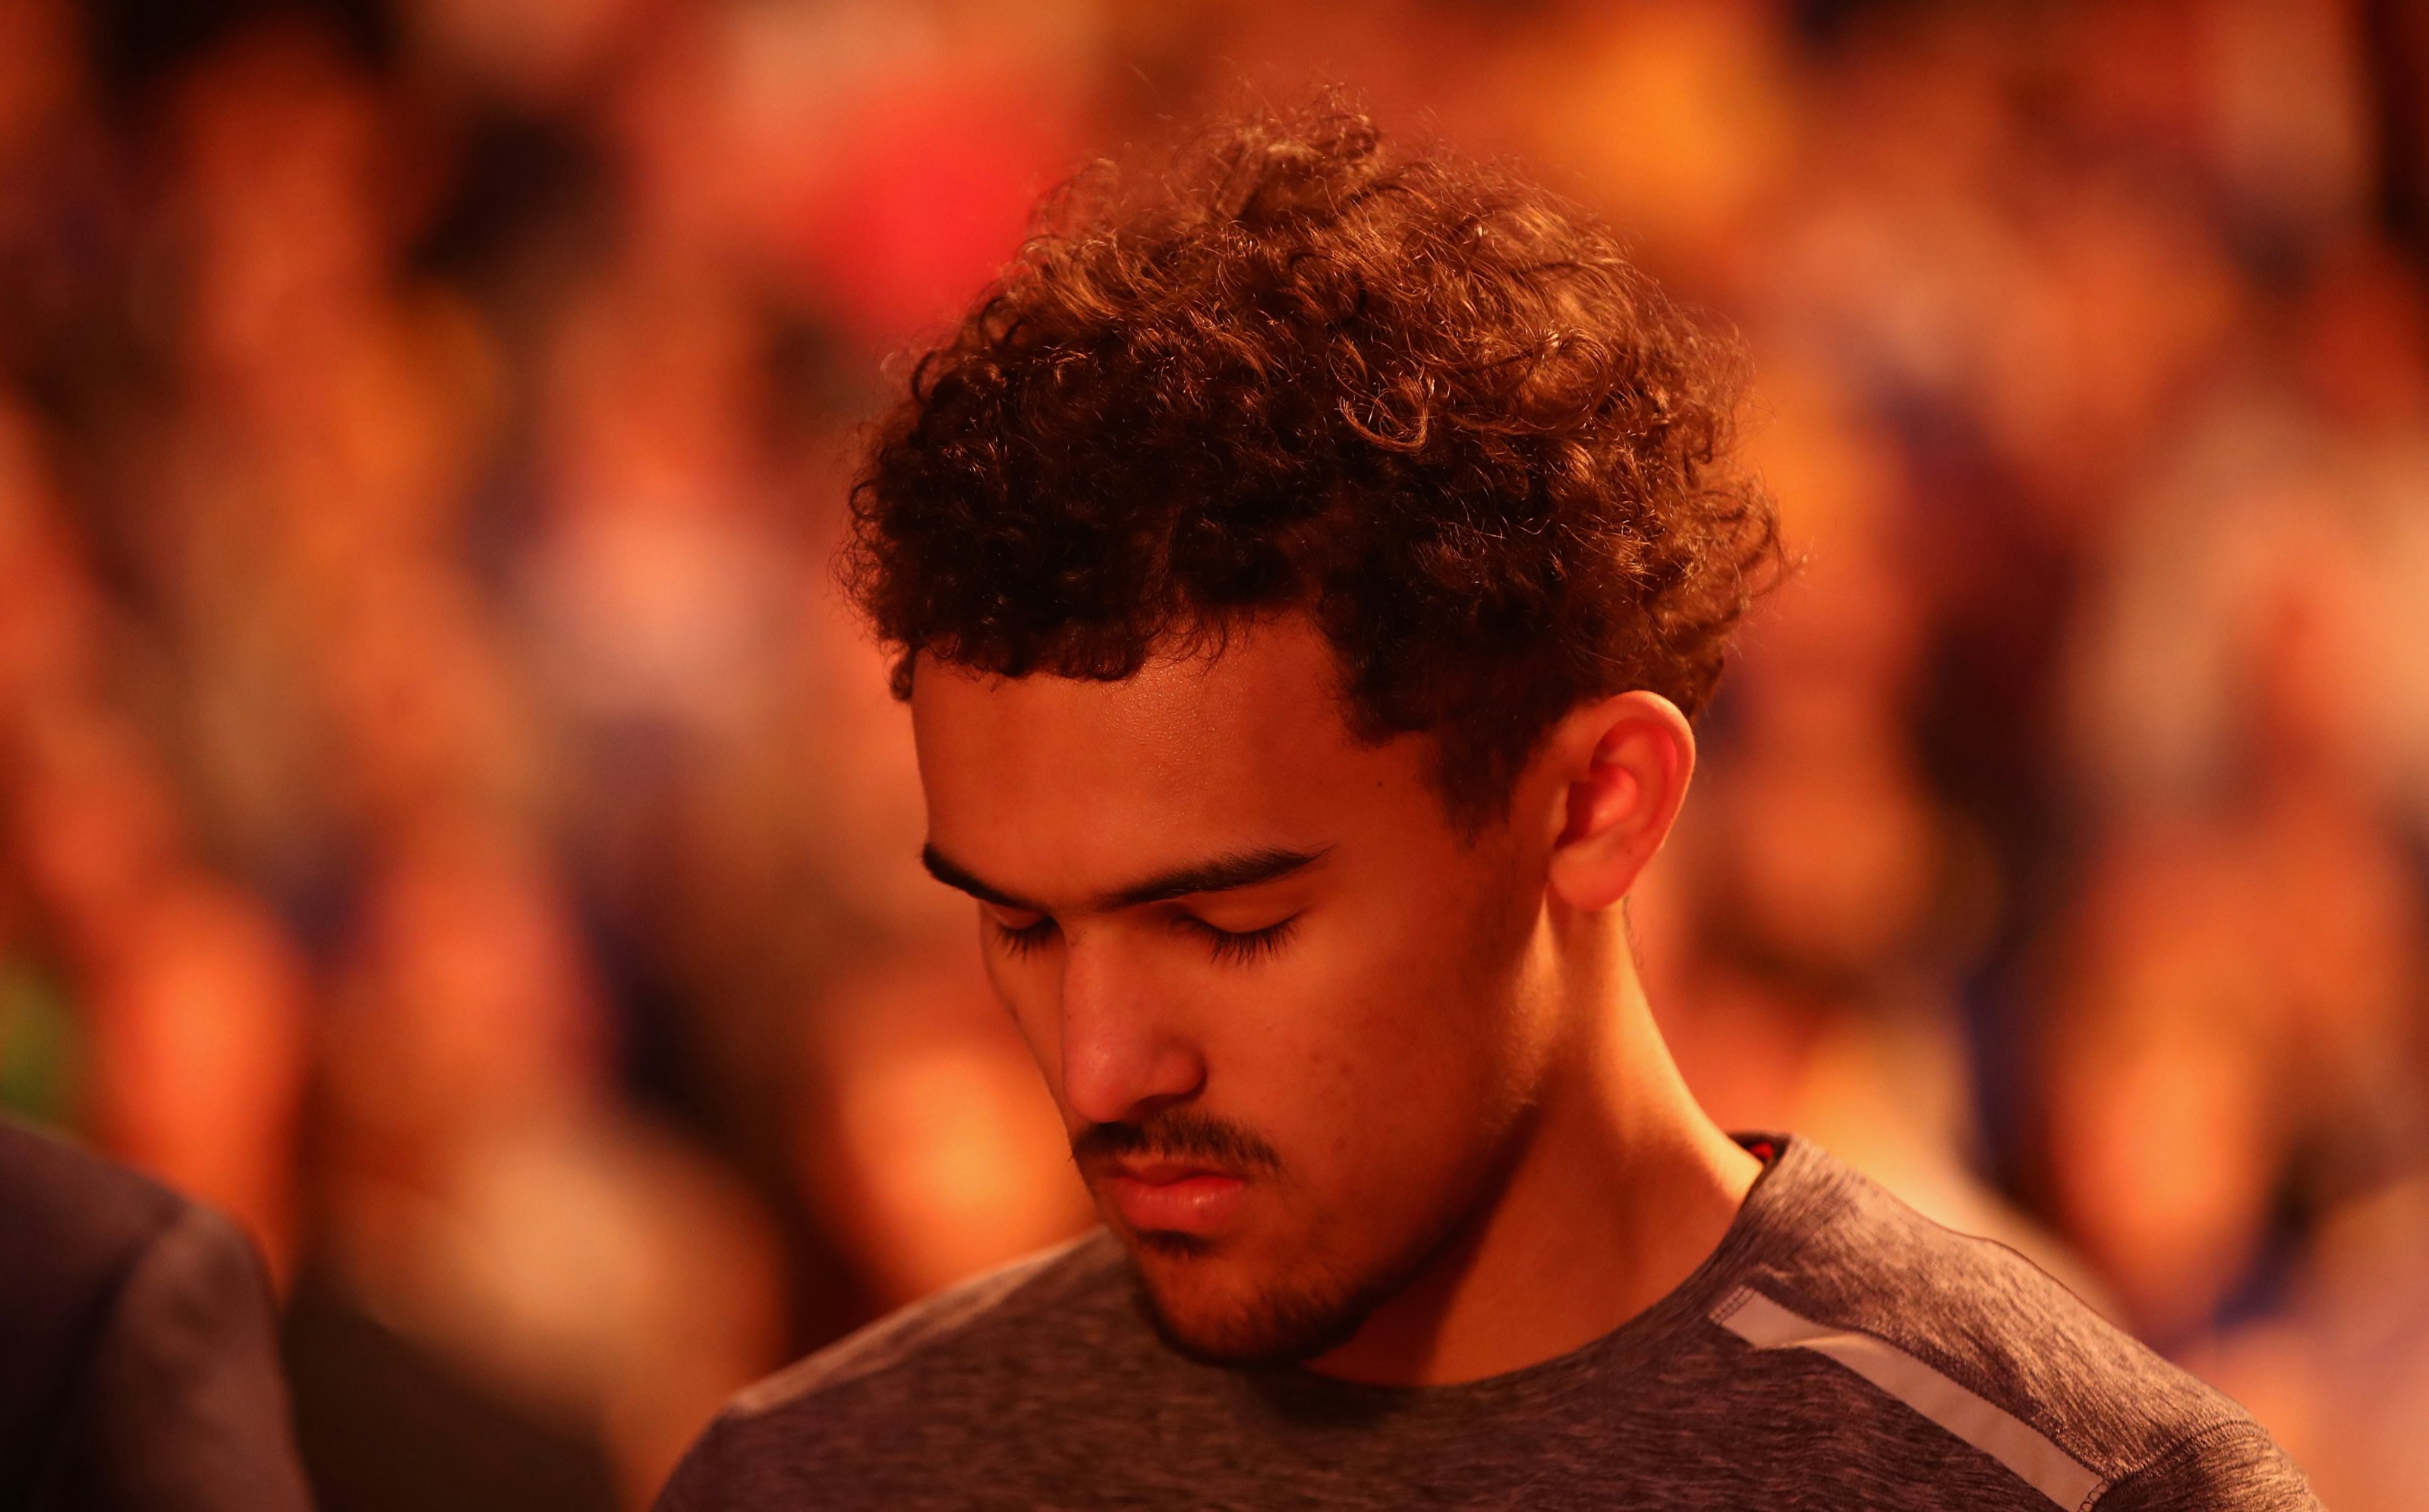 Trae Young Haircut: most popular photos